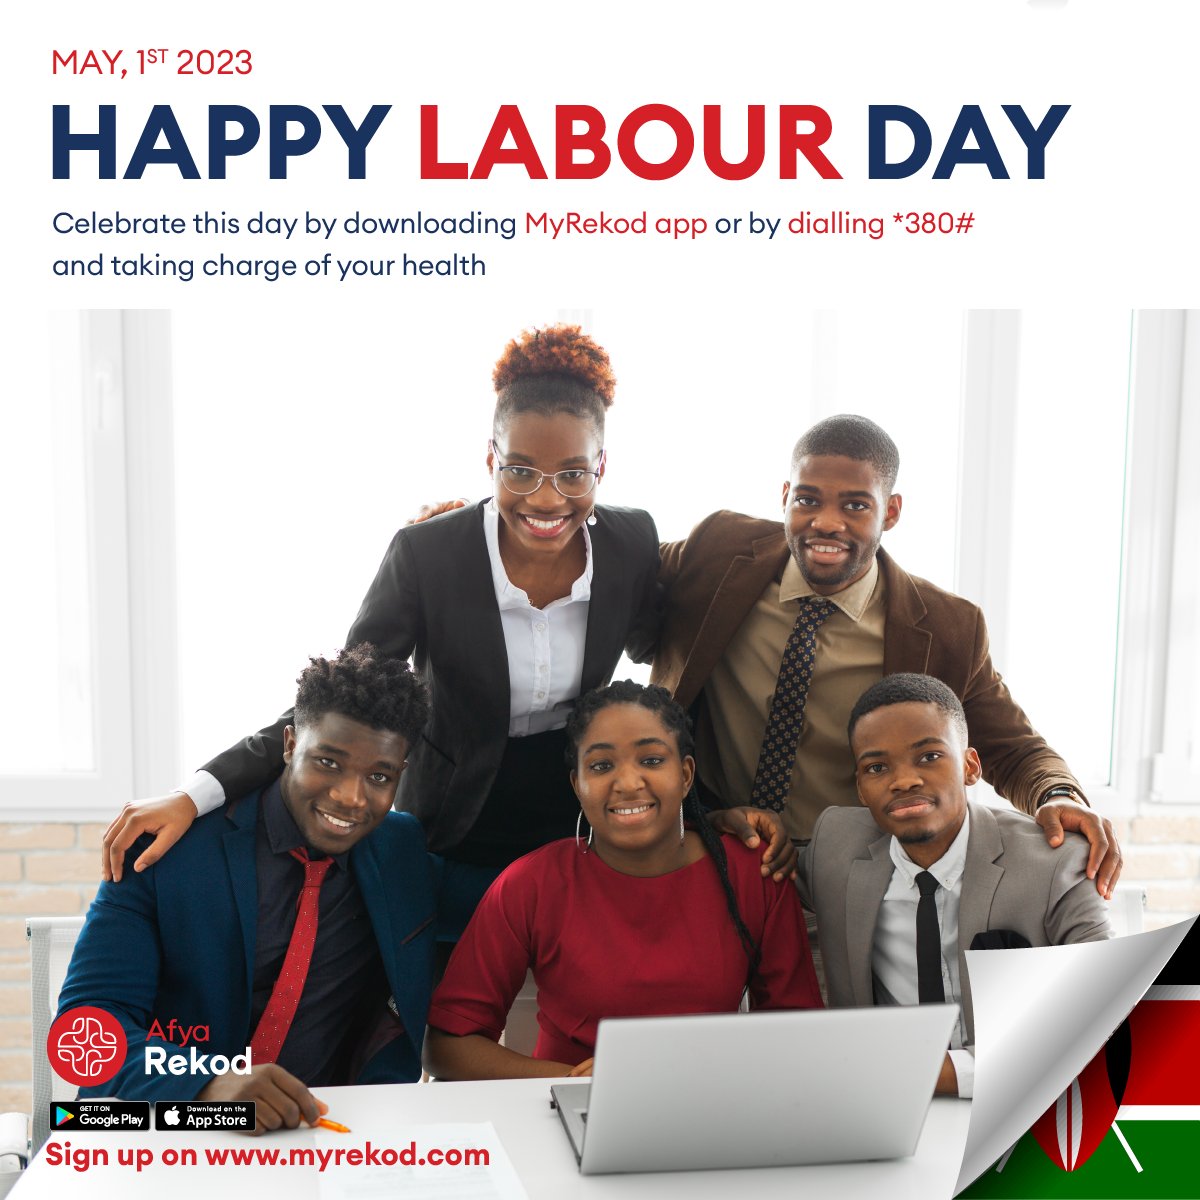 Happy Labour Day! We celebrate your hard work and relentless dedication today. #myrekod #healthcare #ownyourhealth